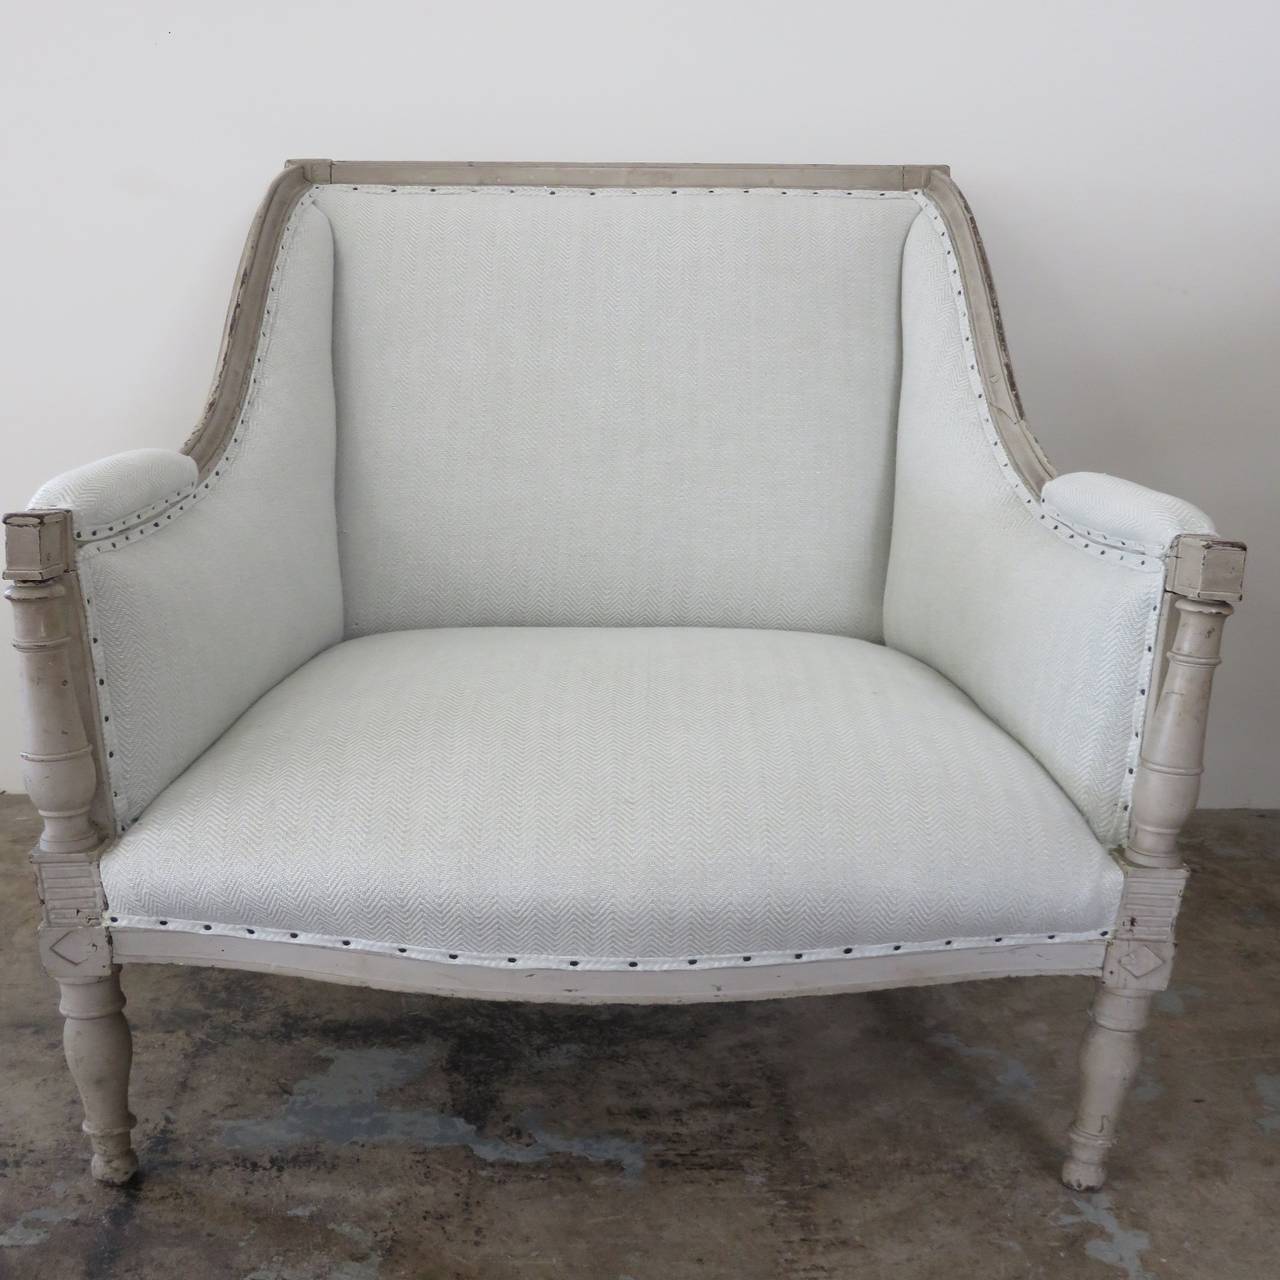 19th century French painted Directoire chair, original paint and newly upholstered.